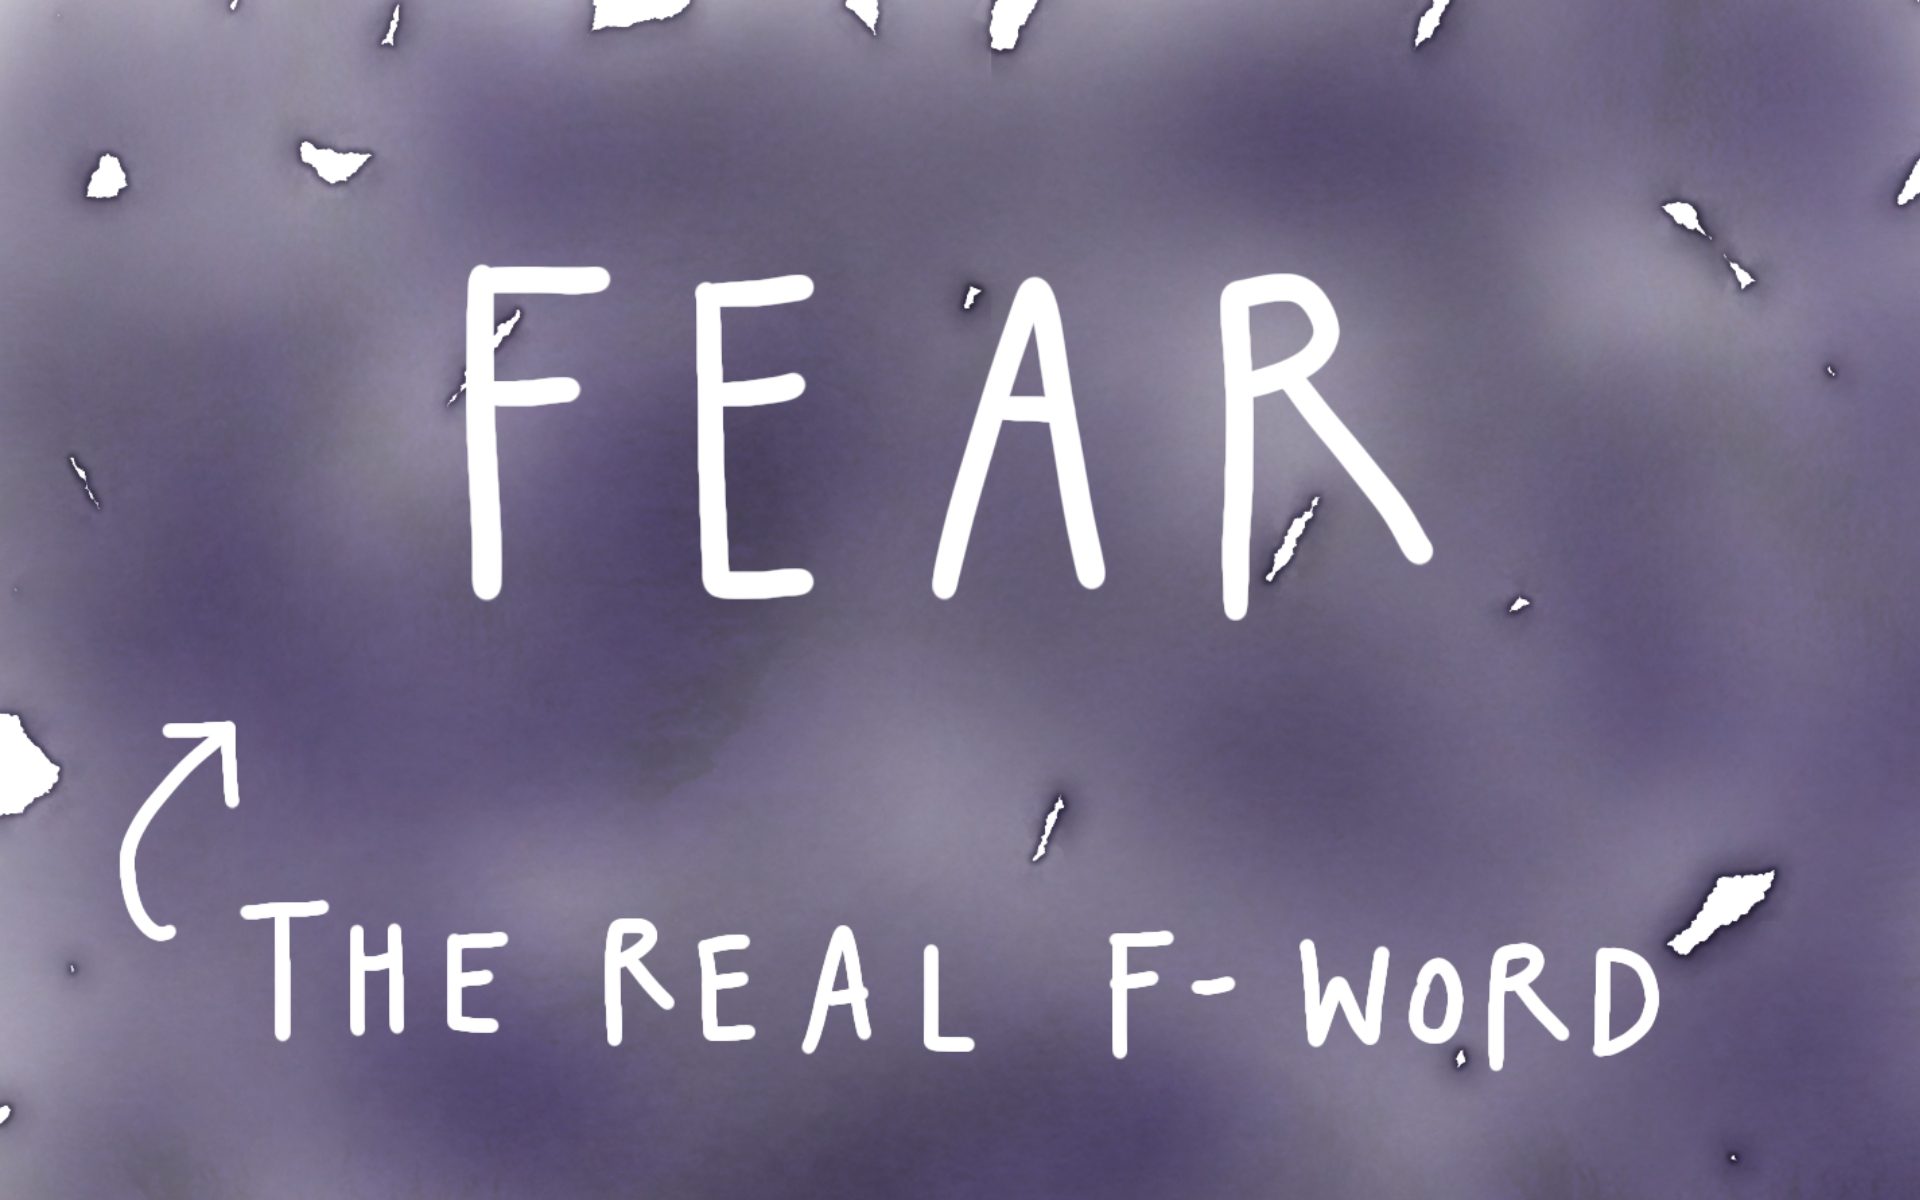 Notes on Fear